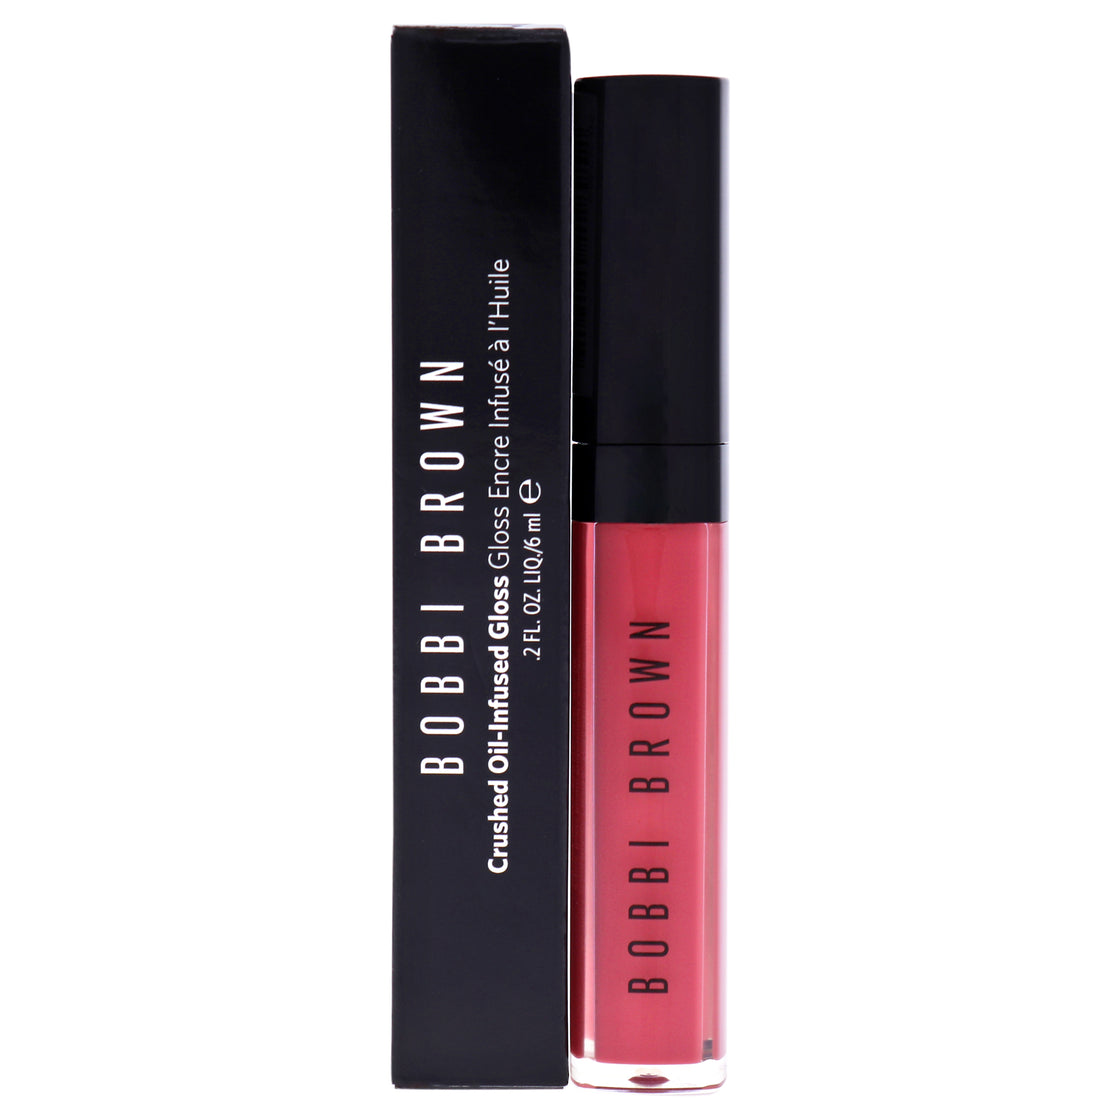 Crushed Oil-Infused Gloss - Love Letter by Bobbi Brown for Women - 0.2 oz Lip Gloss